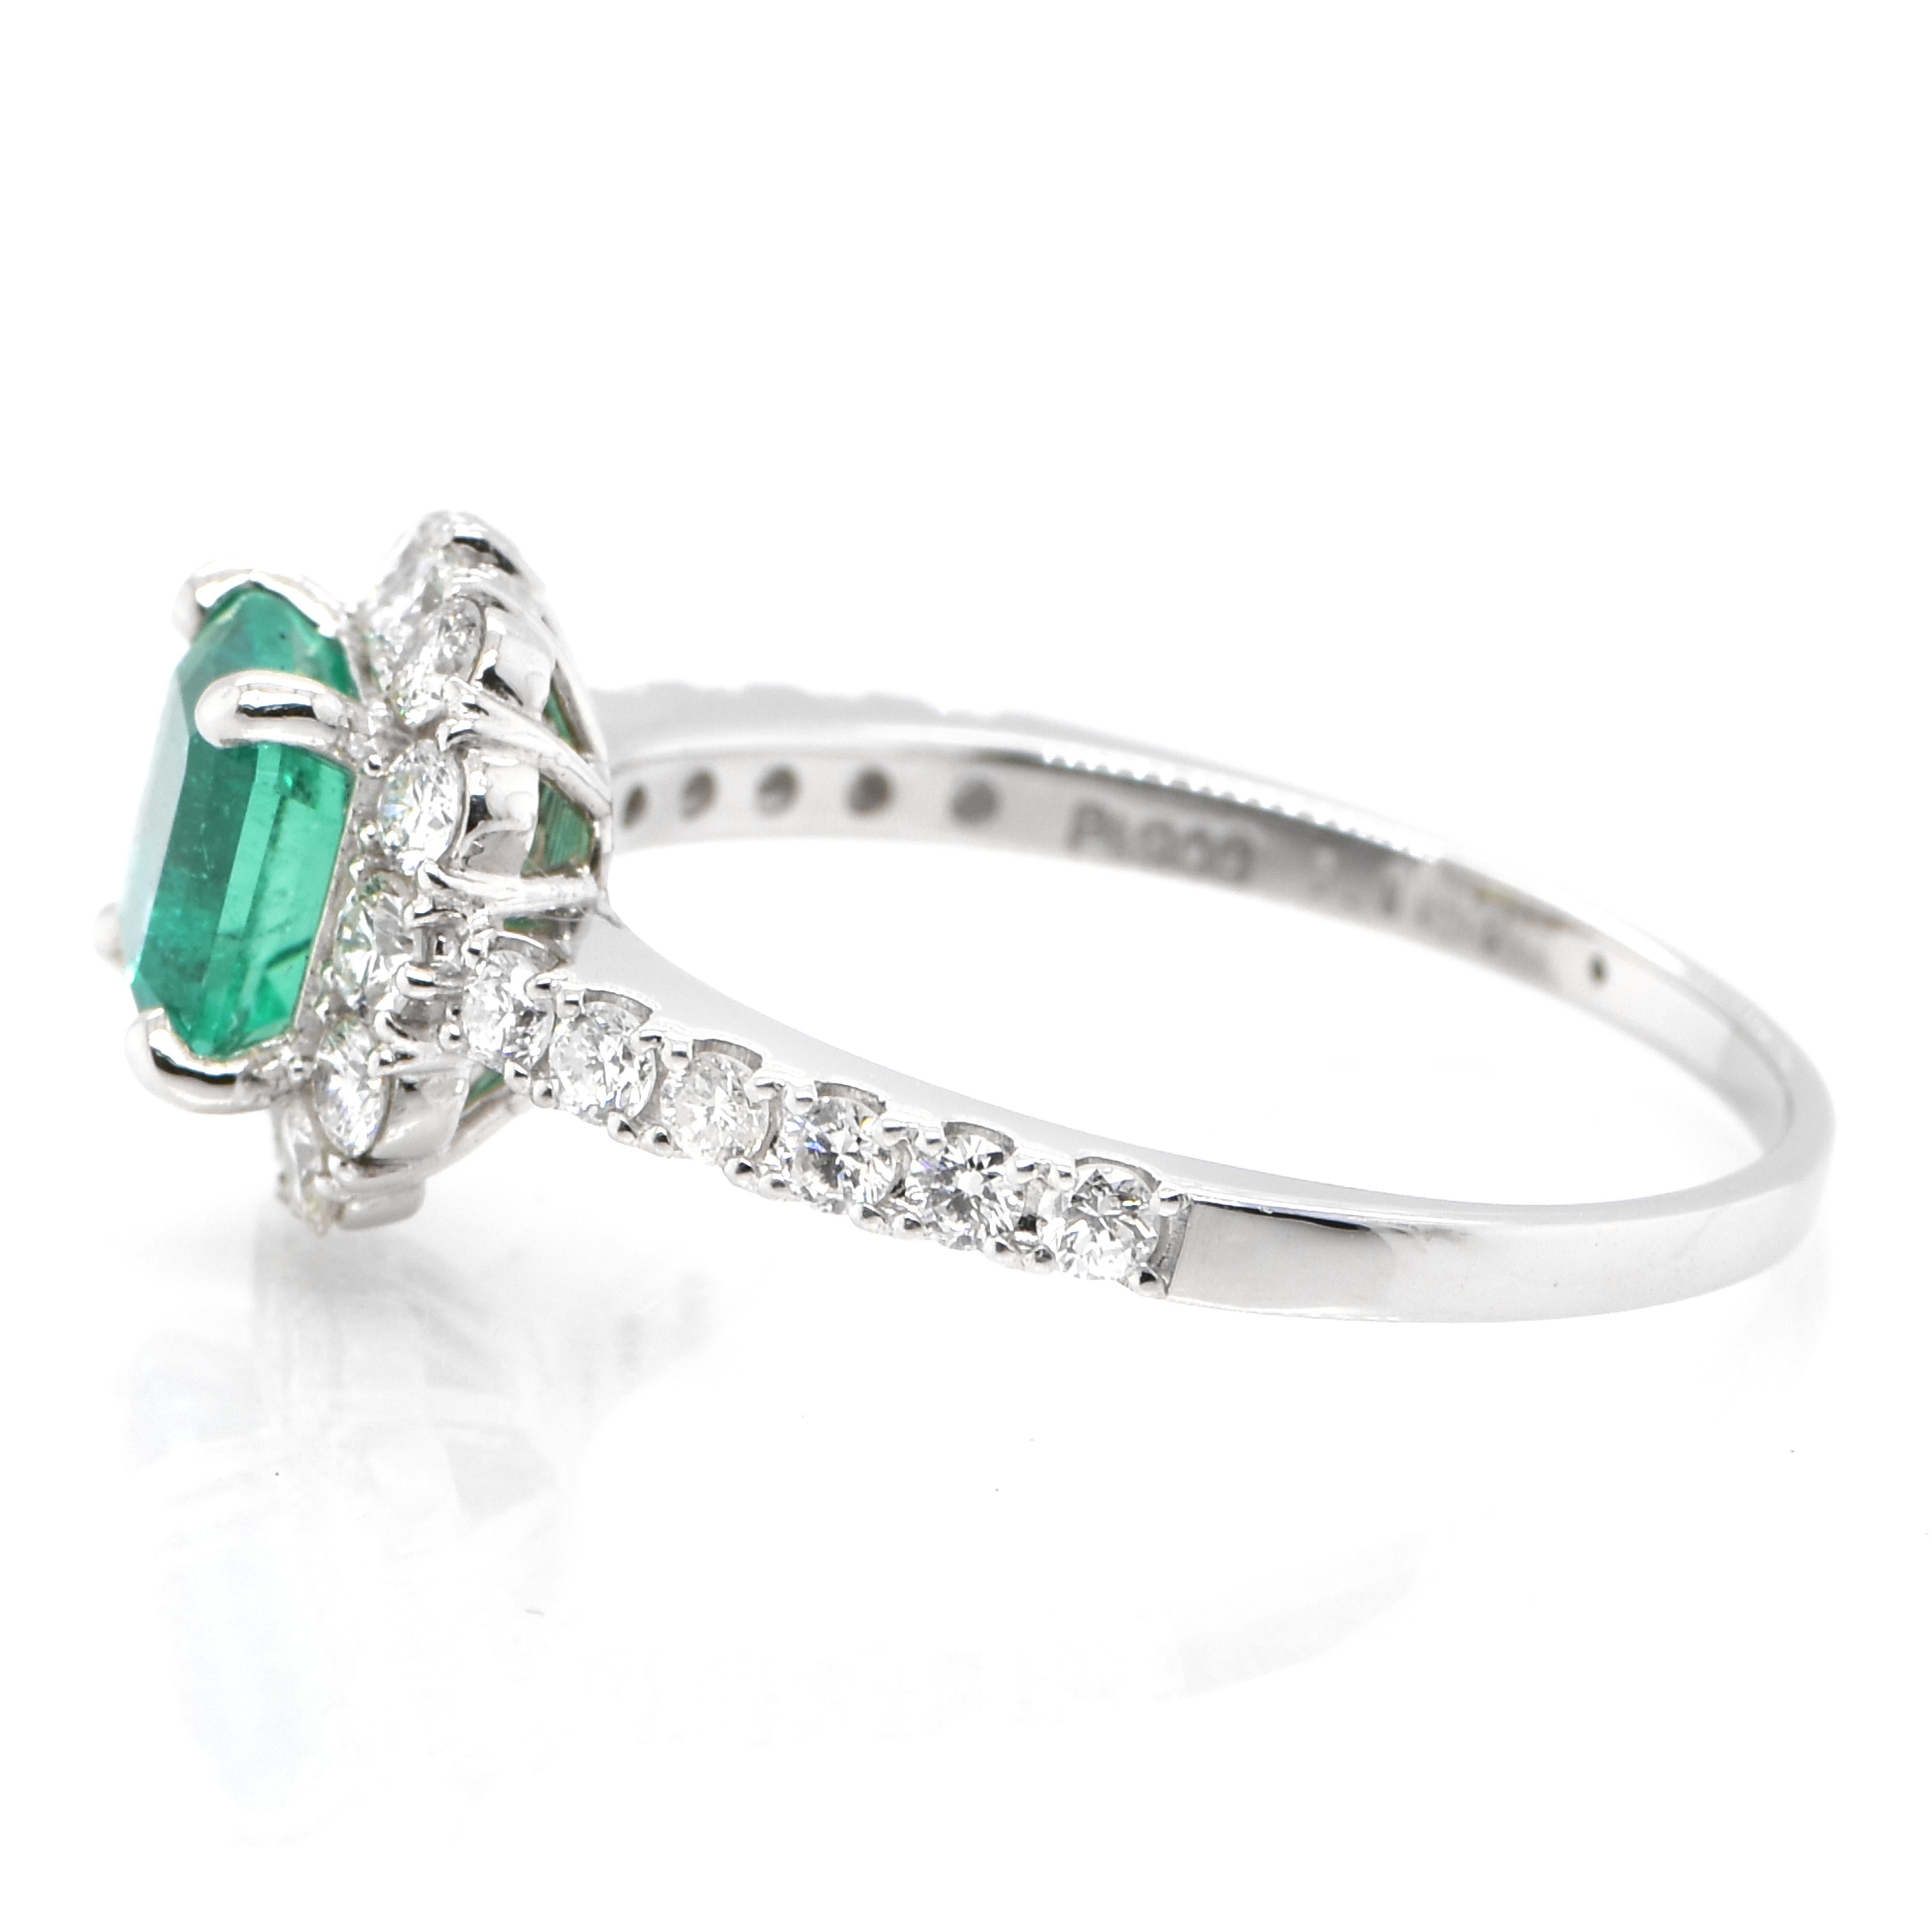 Emerald Cut 1.10 Carat Natural Colombian Emerald and Diamond Halo Ring set in Platinum For Sale